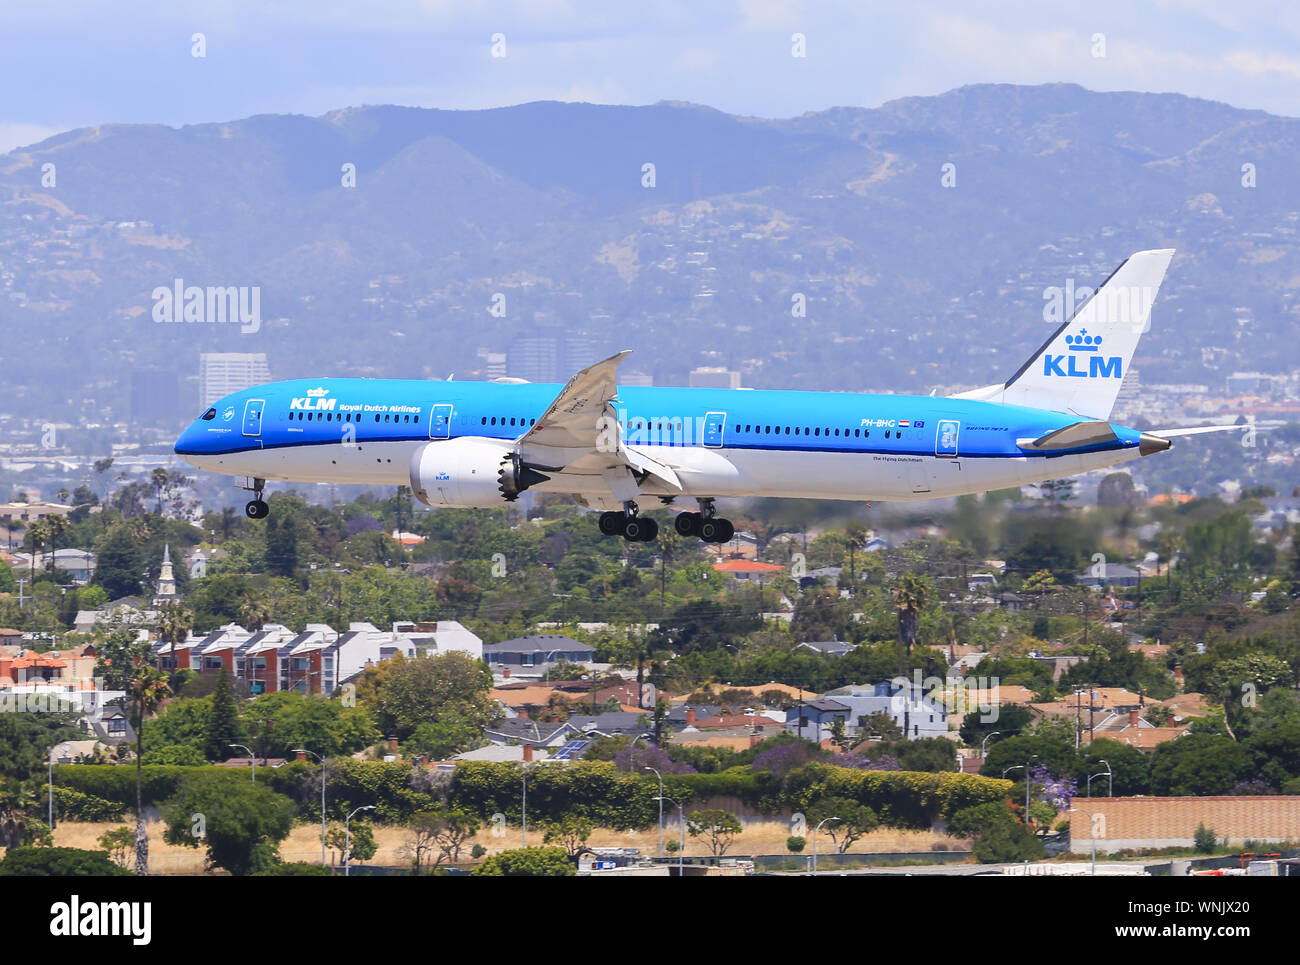 Los Angeles, California, USA - May 22, 2019: A KLM Boeing 787 Dreamliner lands at the Los Angeles International Airport (LAX). Stock Photo